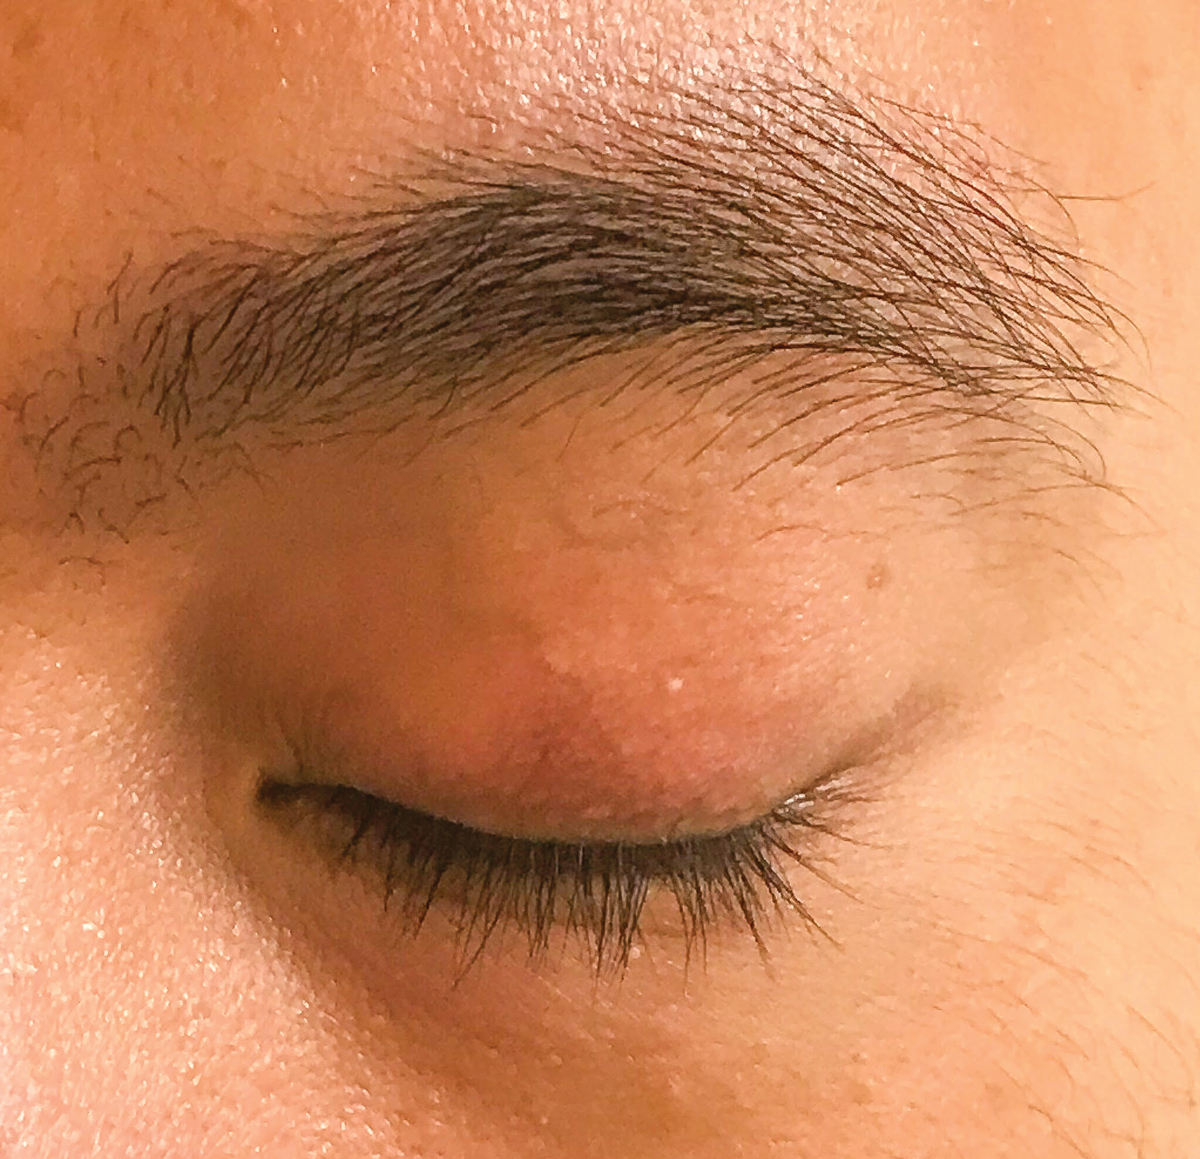 Fig. 5. Resolution of the chalazion four to five weeks post-injection.